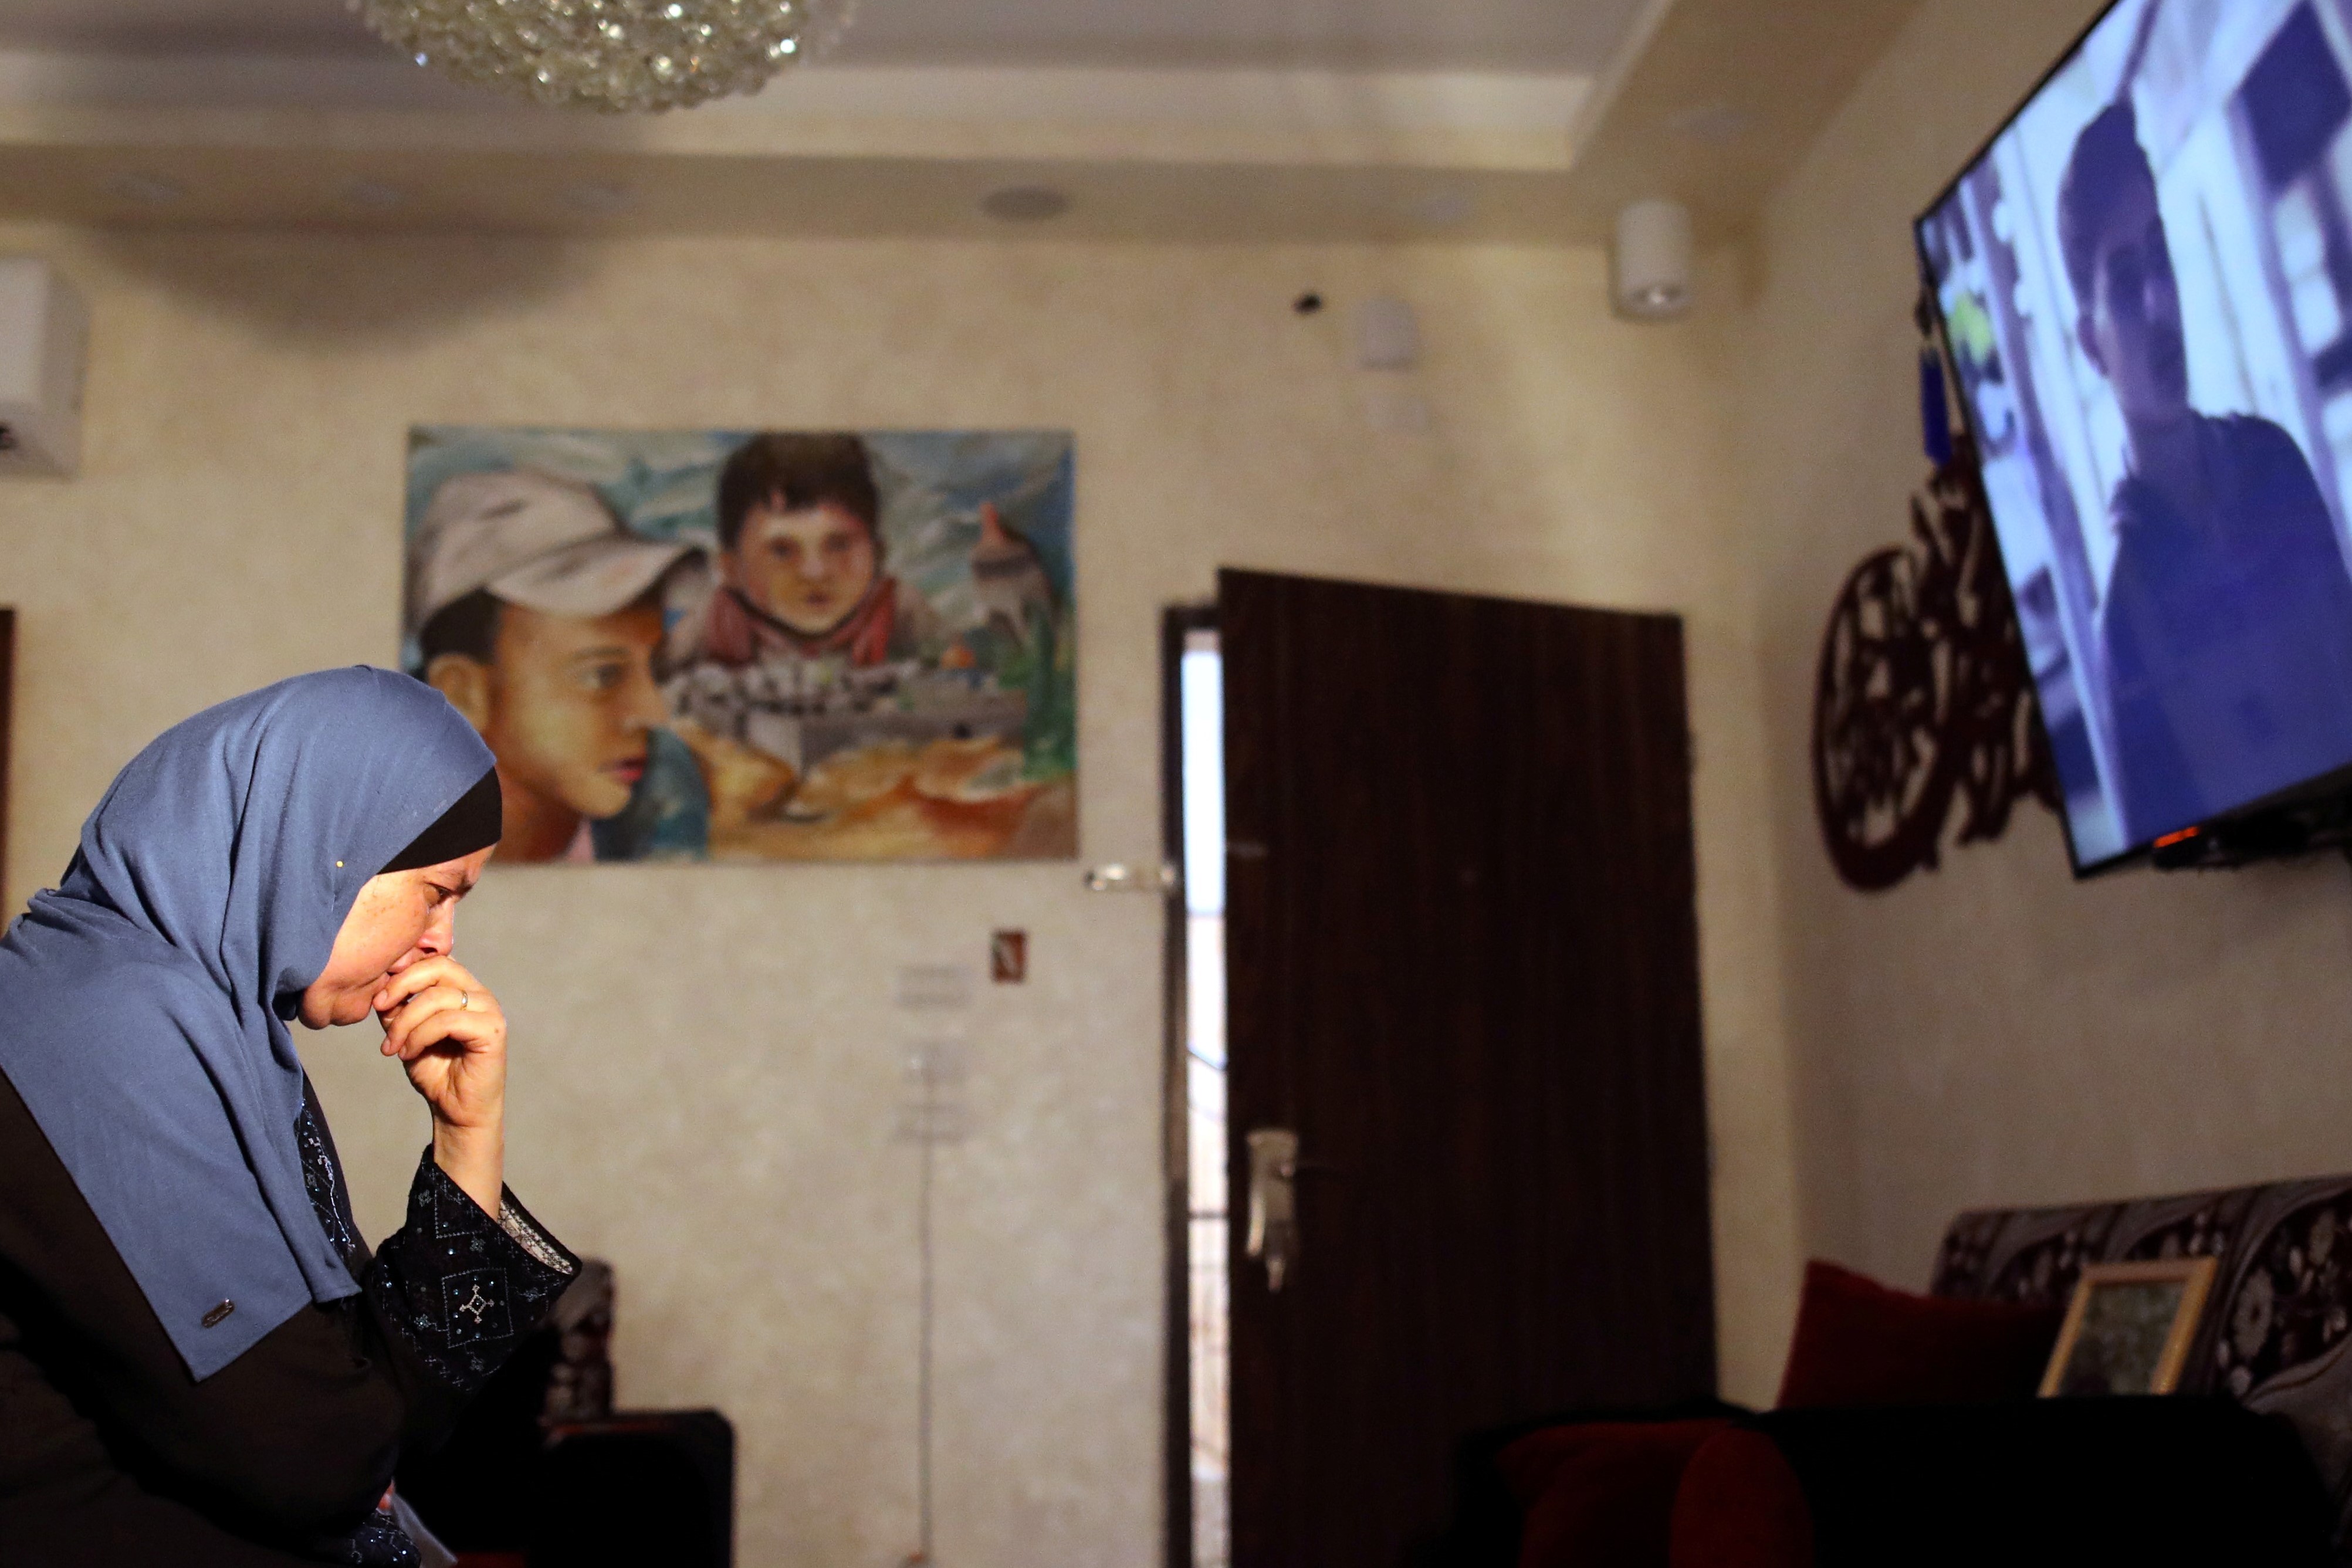  Suha Abu Khdeir, whose son's murder is the subject of the HBO series "Our Boys", watch the show's first two episodes in their East Jerusalem home on 18 August (Reuters)